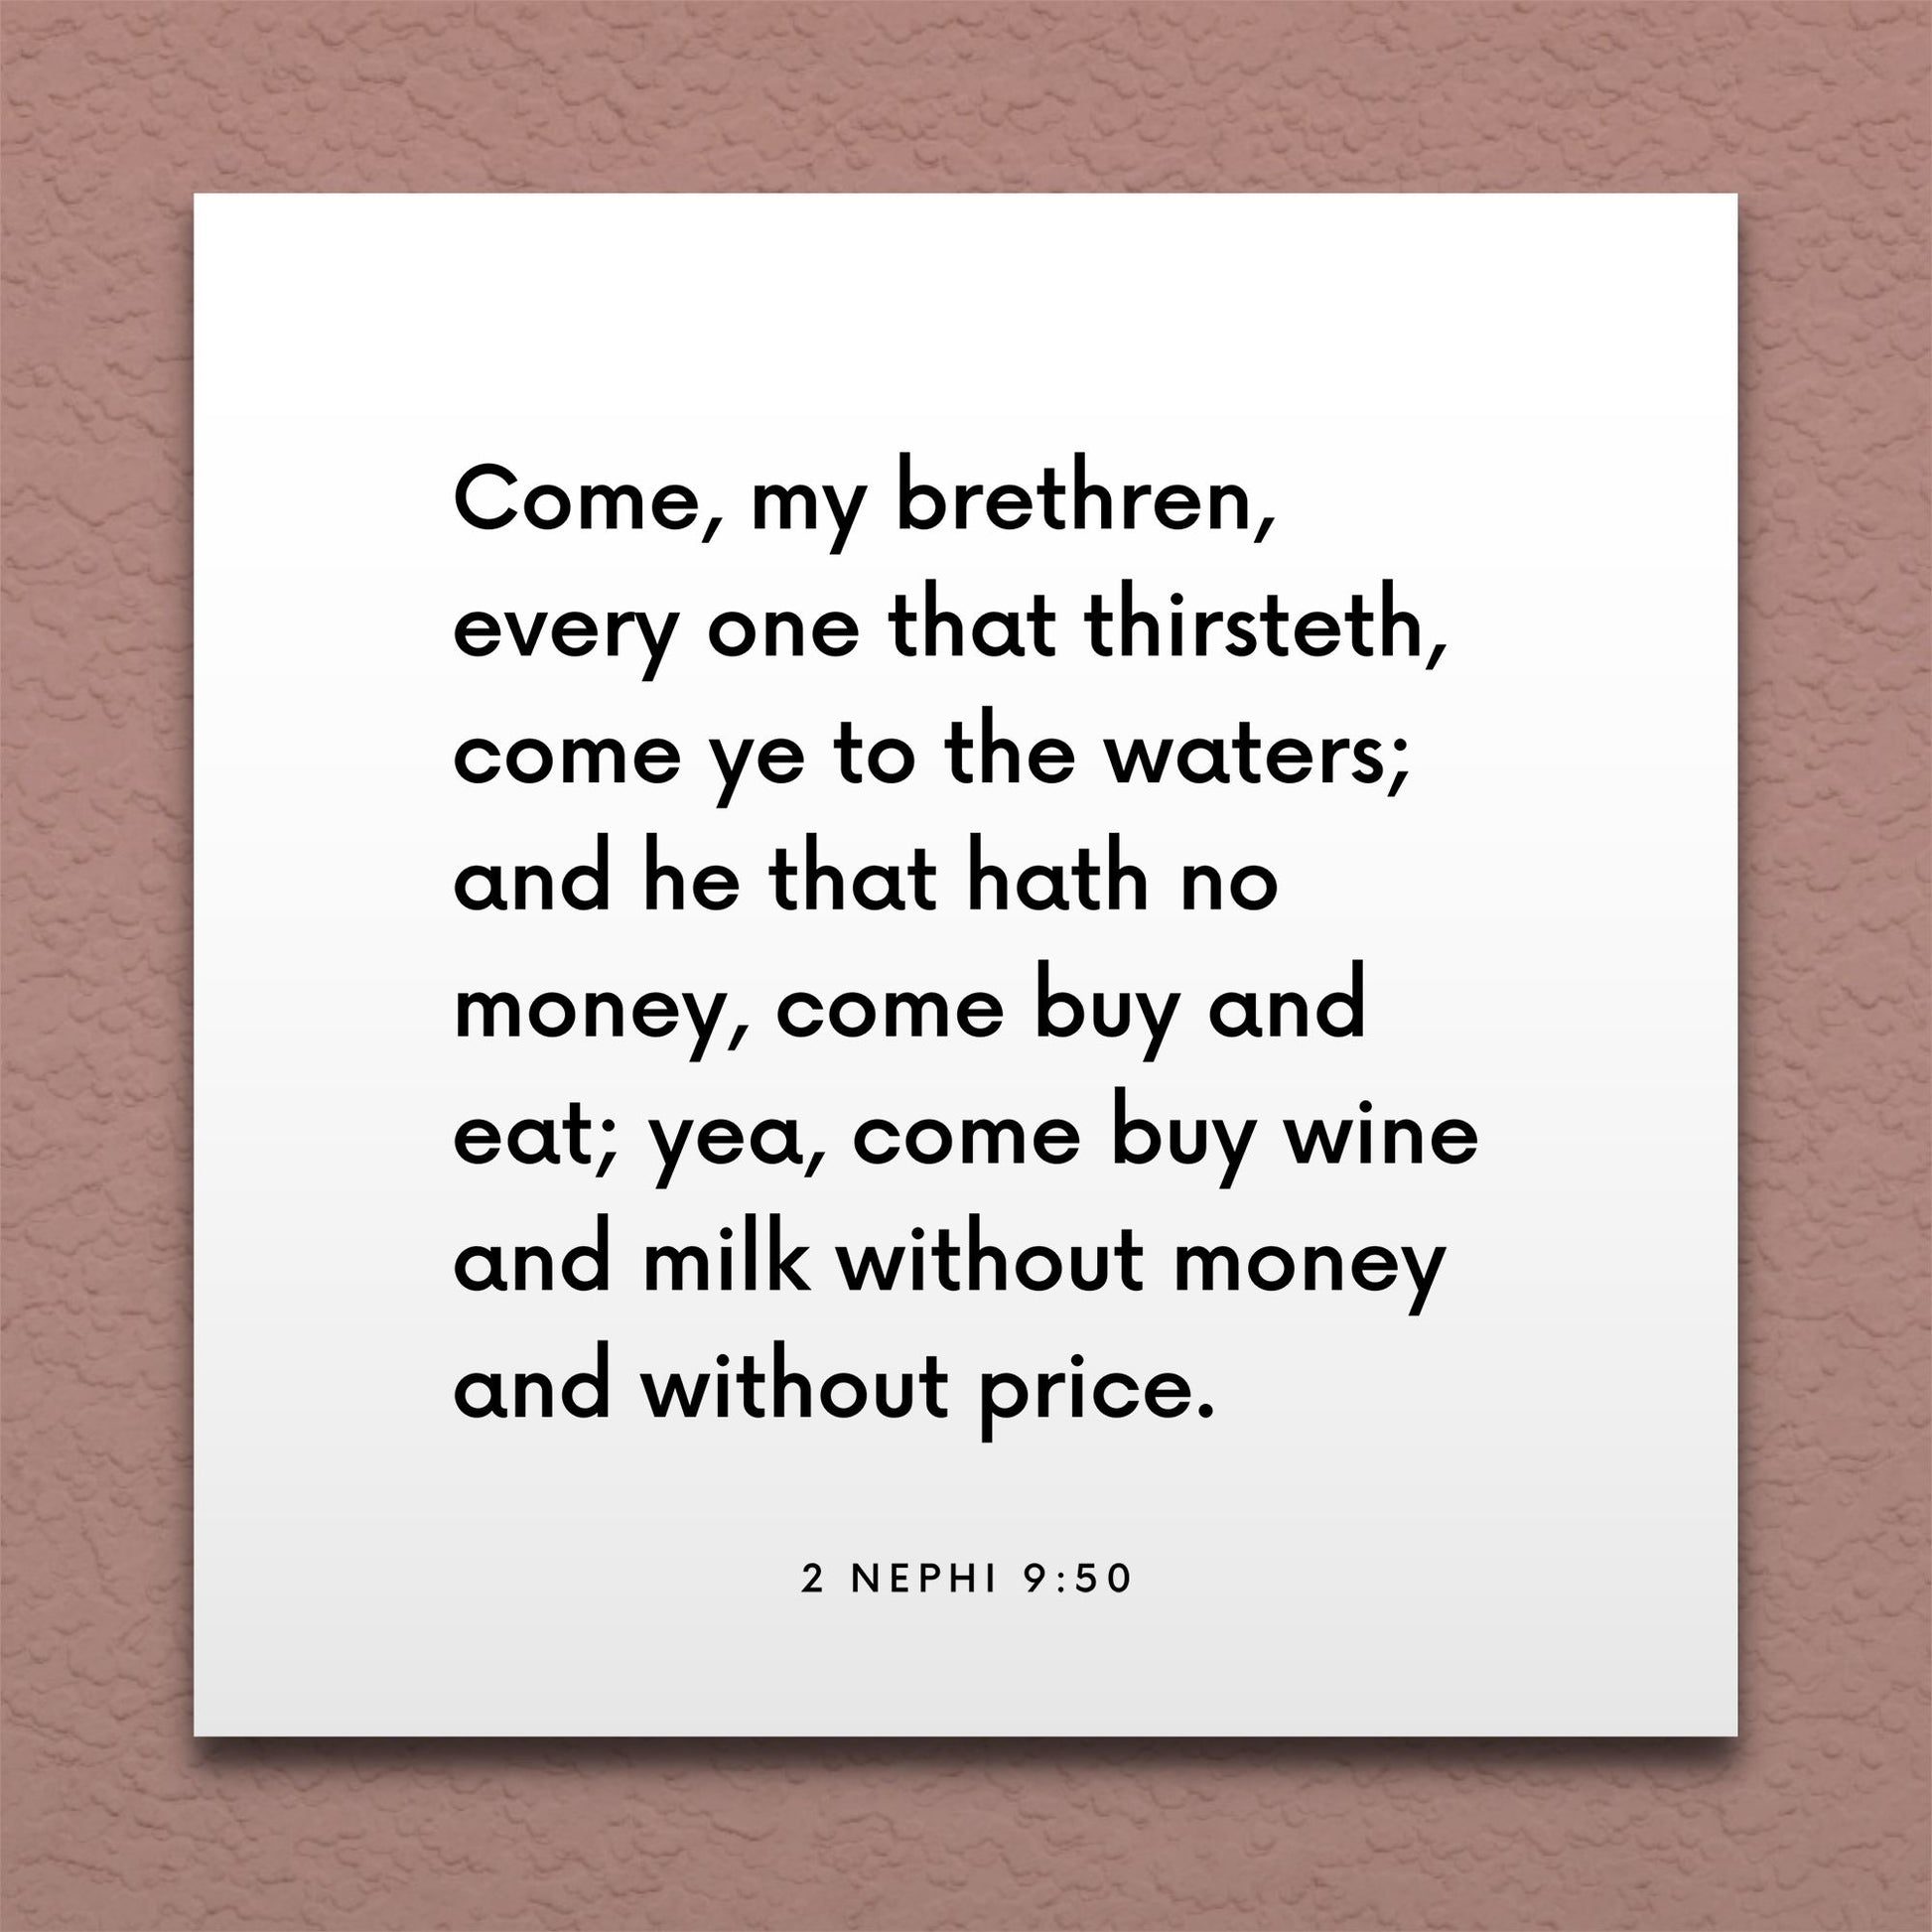 Wall-mounted scripture tile for 2 Nephi 9:50 - "Come buy wine and milk without money and without price"